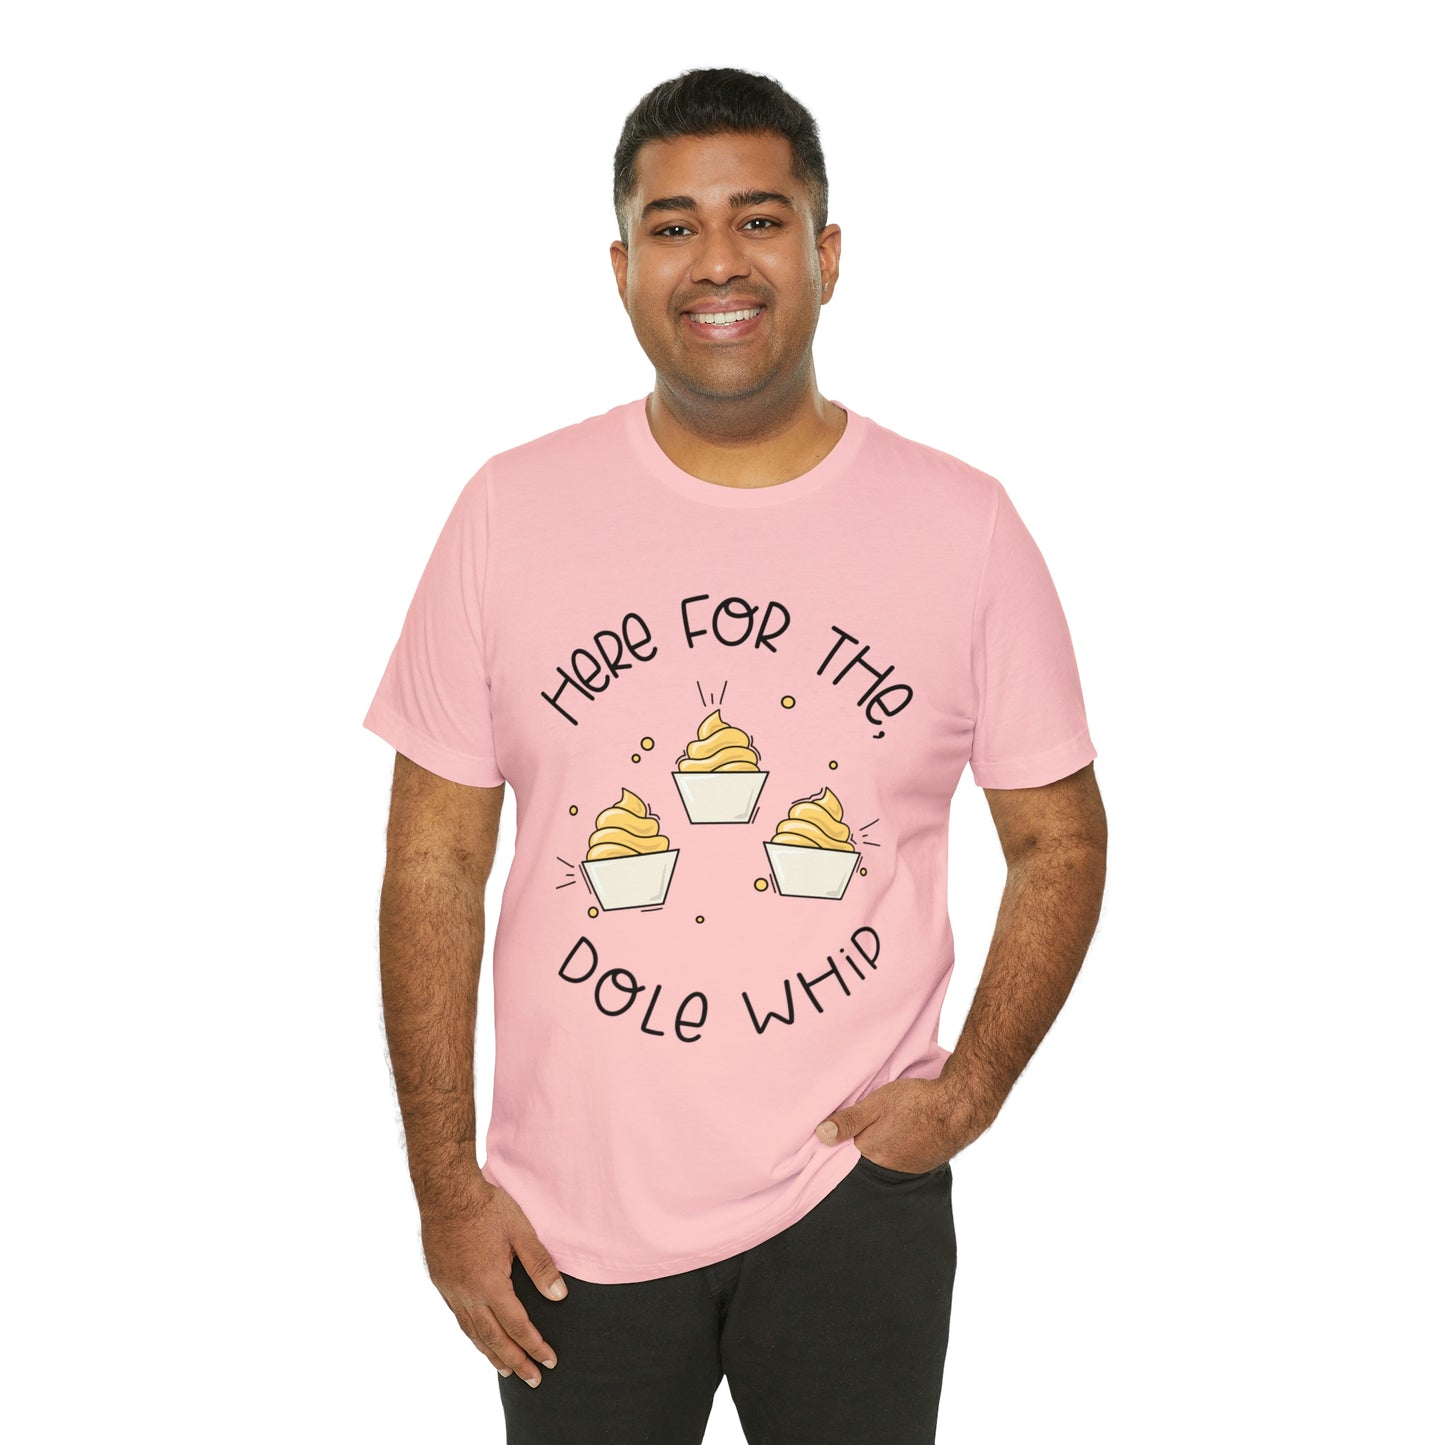 Adult Here for the Dole Whip Bella + Canvas Tee